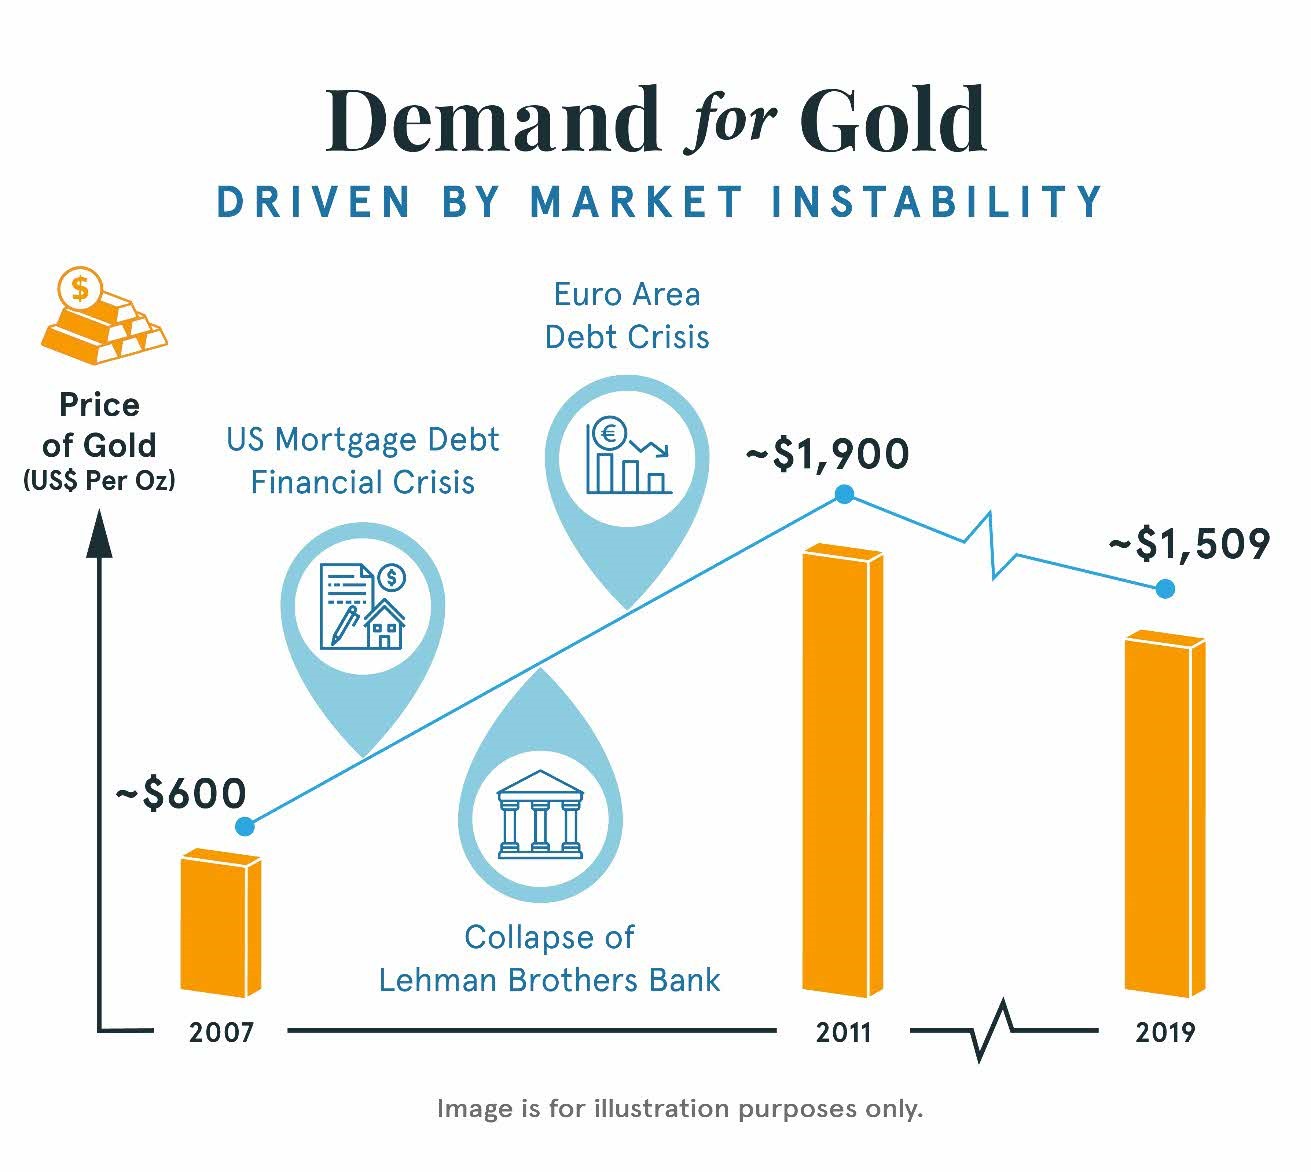 Historically, demand for gold has been driven by market instability